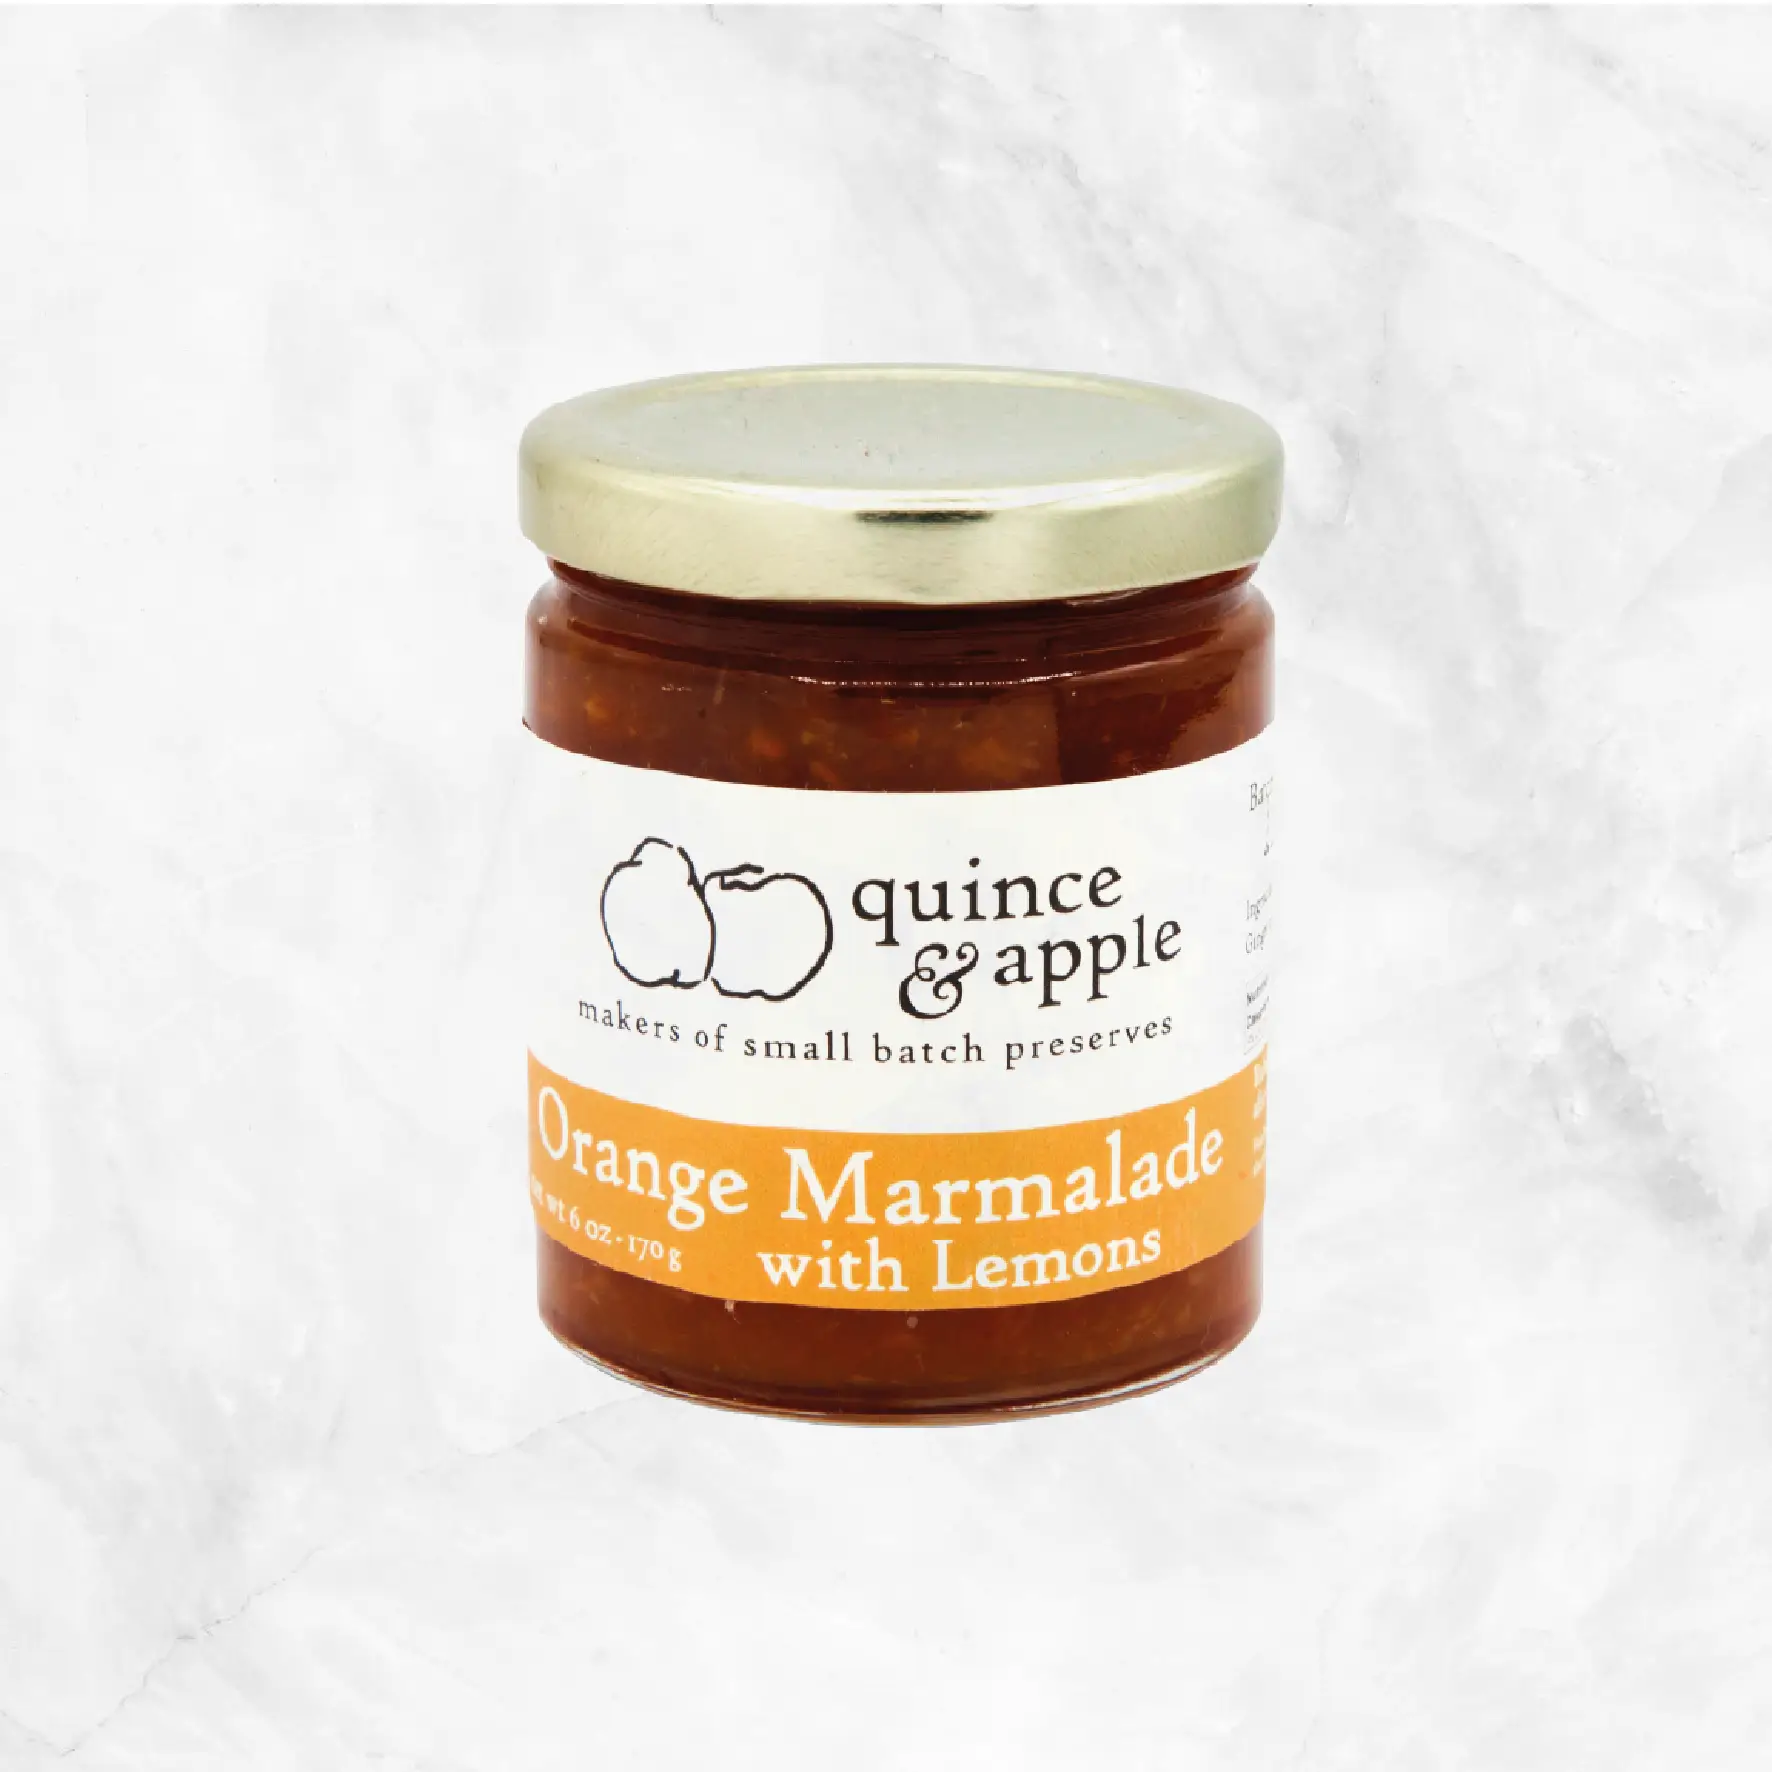 Orange Marmalade with Lemons Delivery